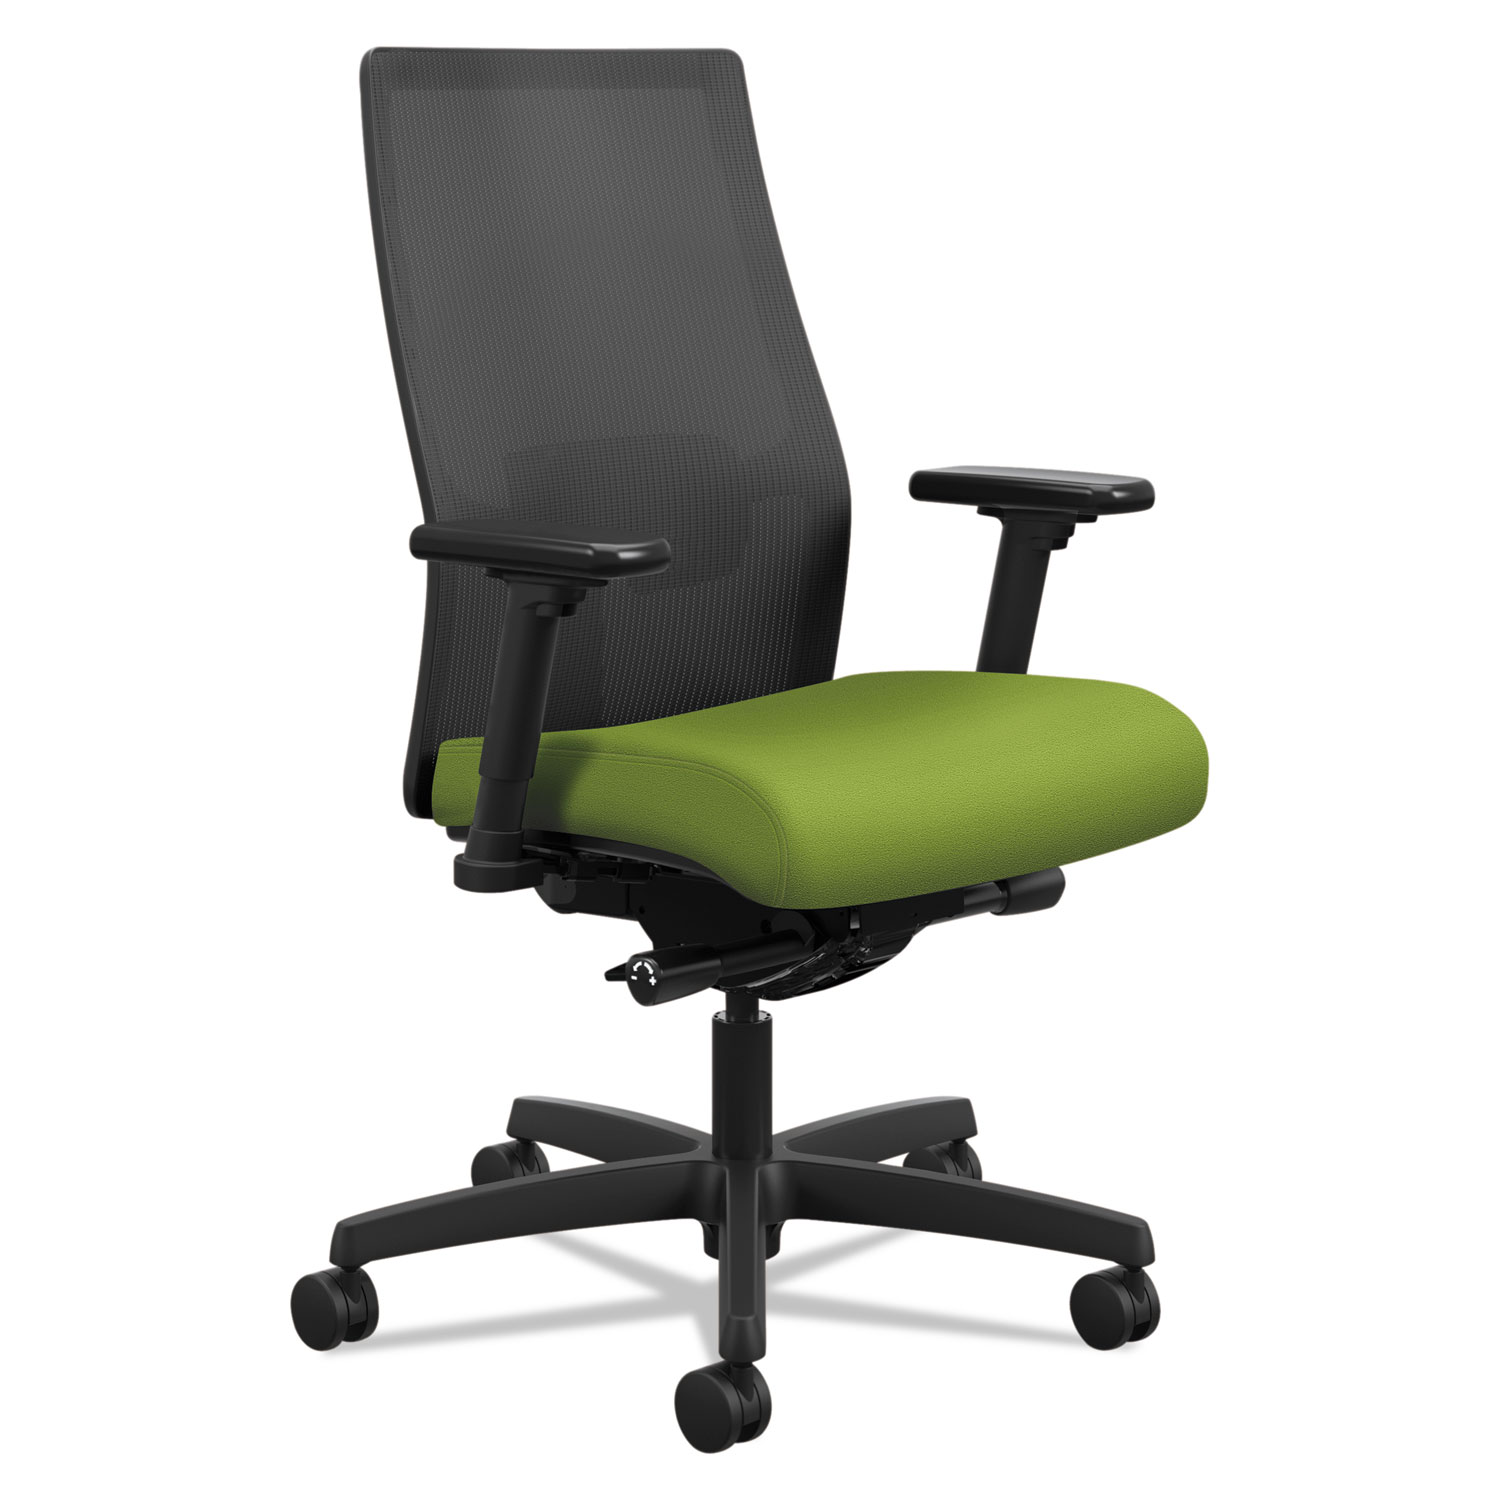  HON HONI2M2AMLC84TK Ignition 2.0 4-Way Stretch Mid-Back Mesh Task Chair, Supports up to 300 lbs., Pear Seat, Black Back/Base (HONI2M2AMLC84TK) 